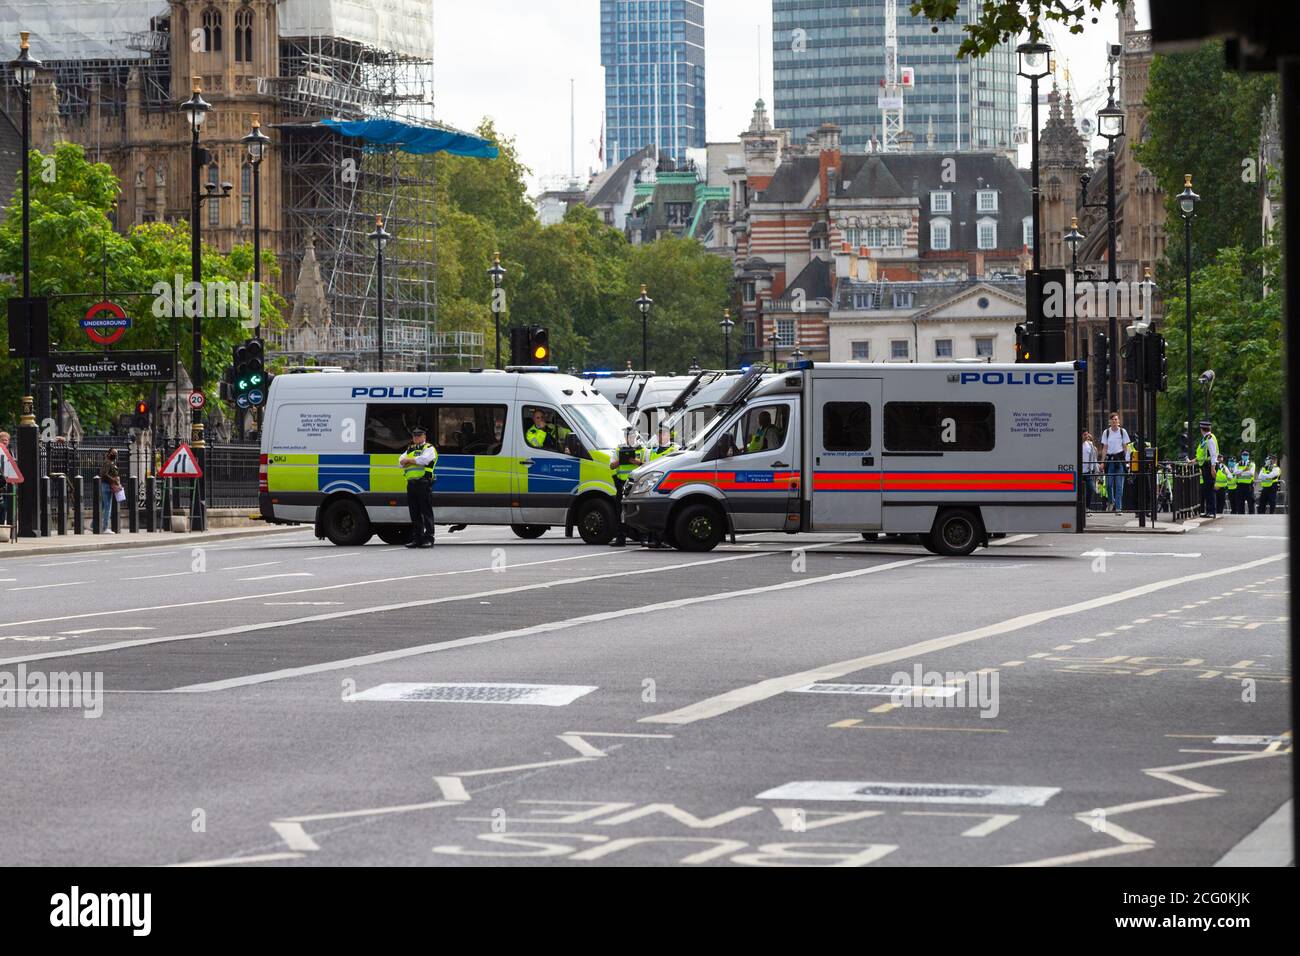 Westminster, London, UK. 8th Sep, 2020. On day 8, Extinction Rebellion XR march down Whitehall in protest. Police vans block barricading the entrance to Parliament street. Photo Credit: Paul Lawrenson-PAL Media/Alamy Live News Stock Photo